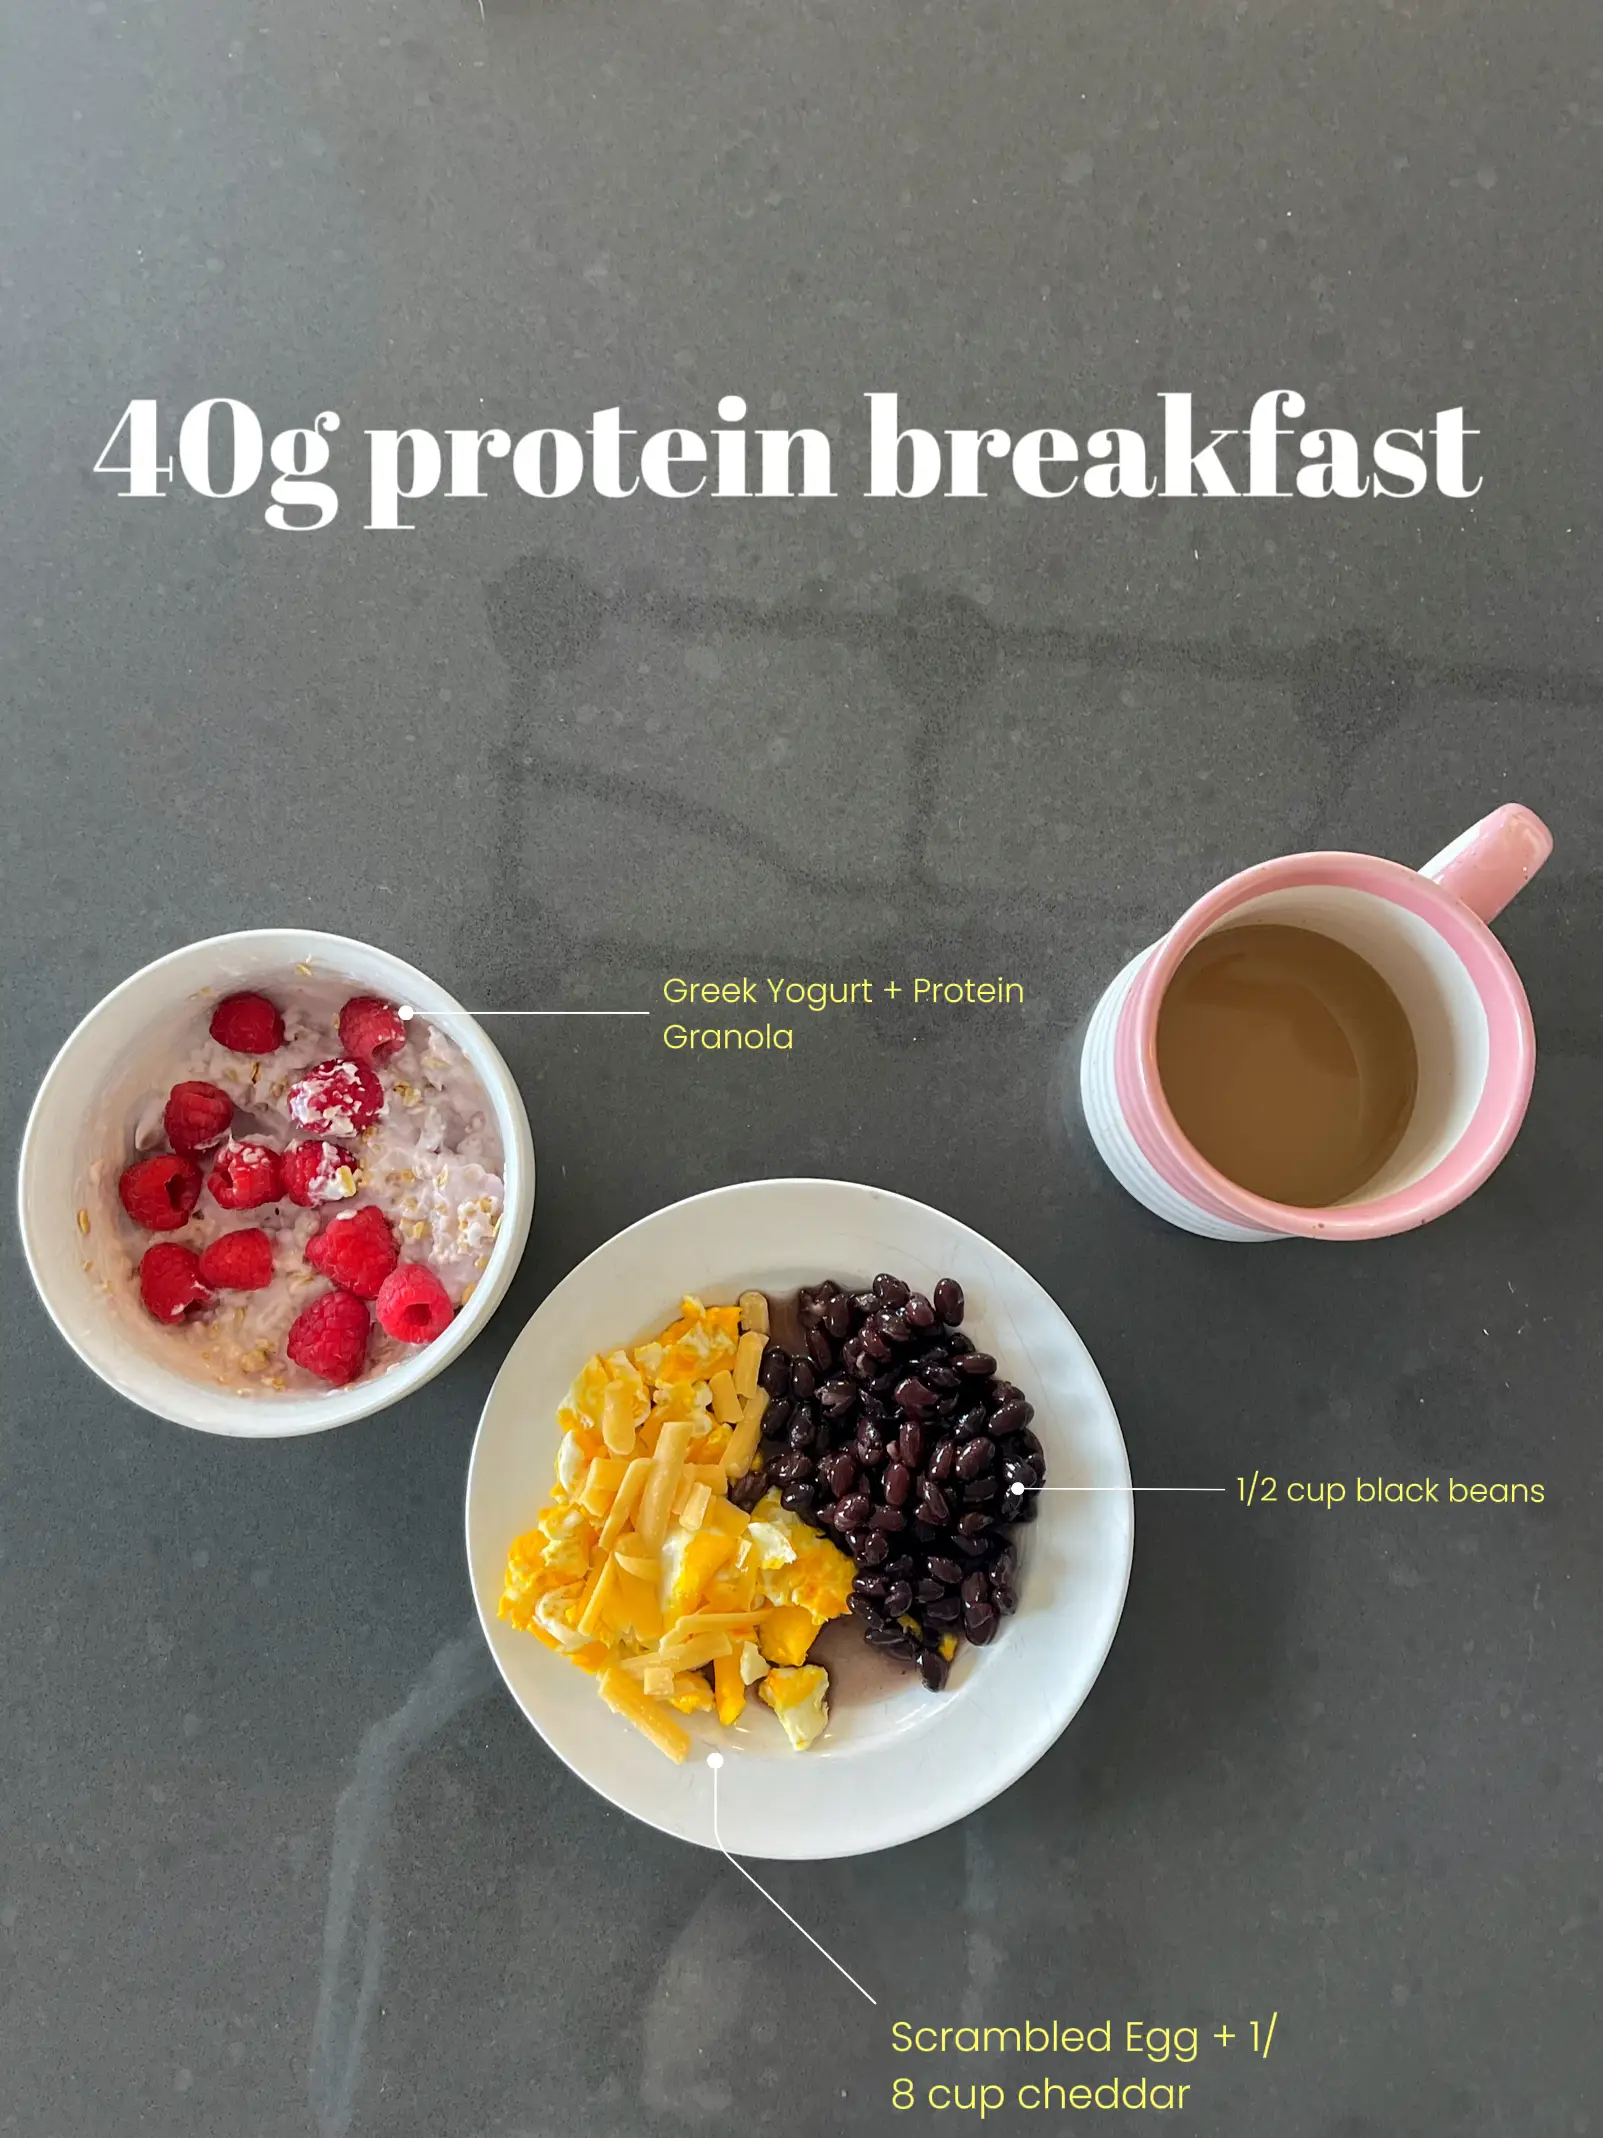 40g of protein at breakfast, Gallery posted by Chelsey